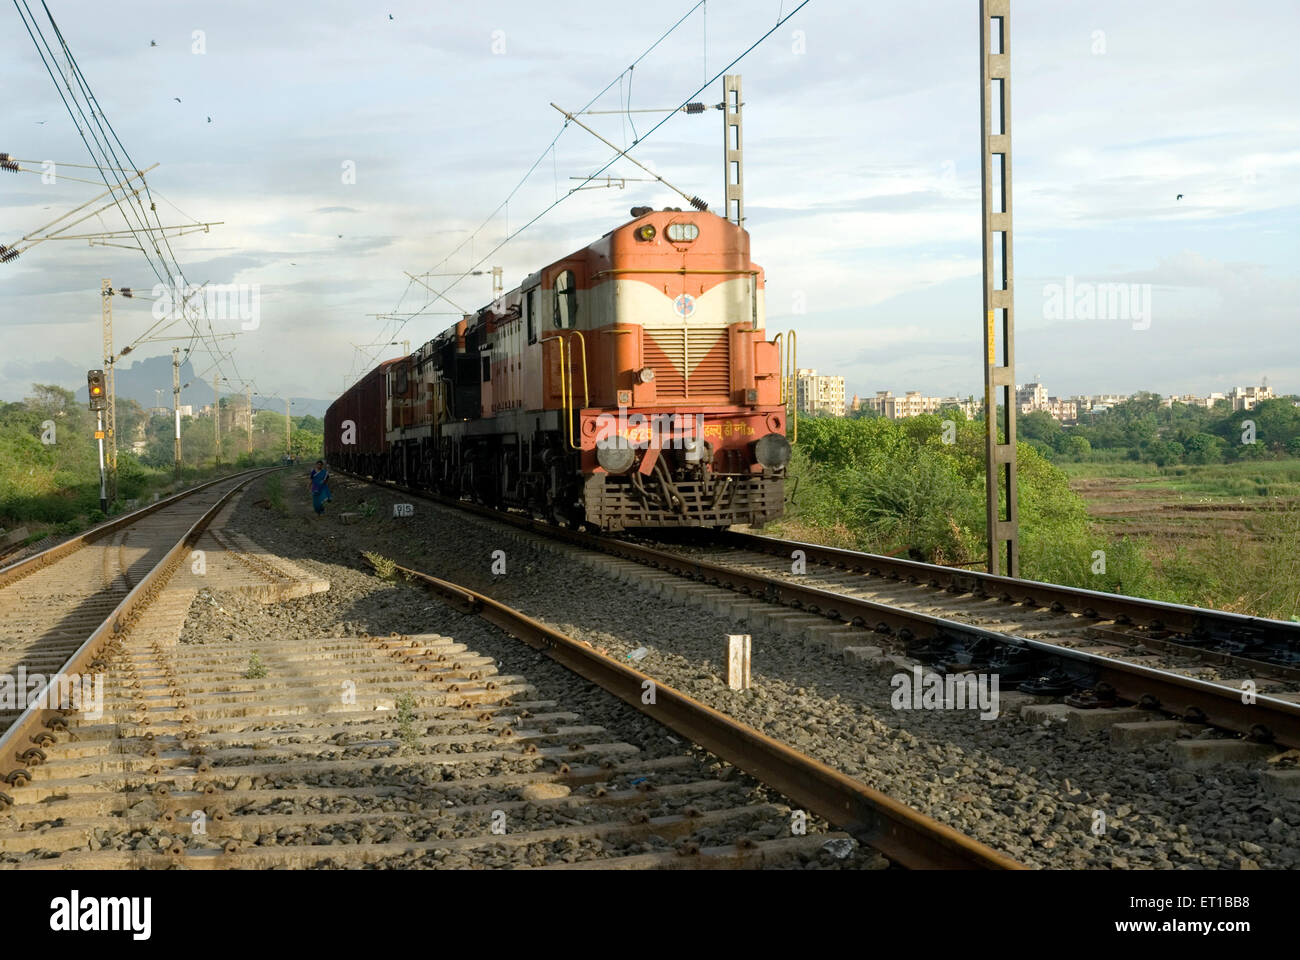 Goods train diesel engine running on electricity railway track ; India Stock Photo